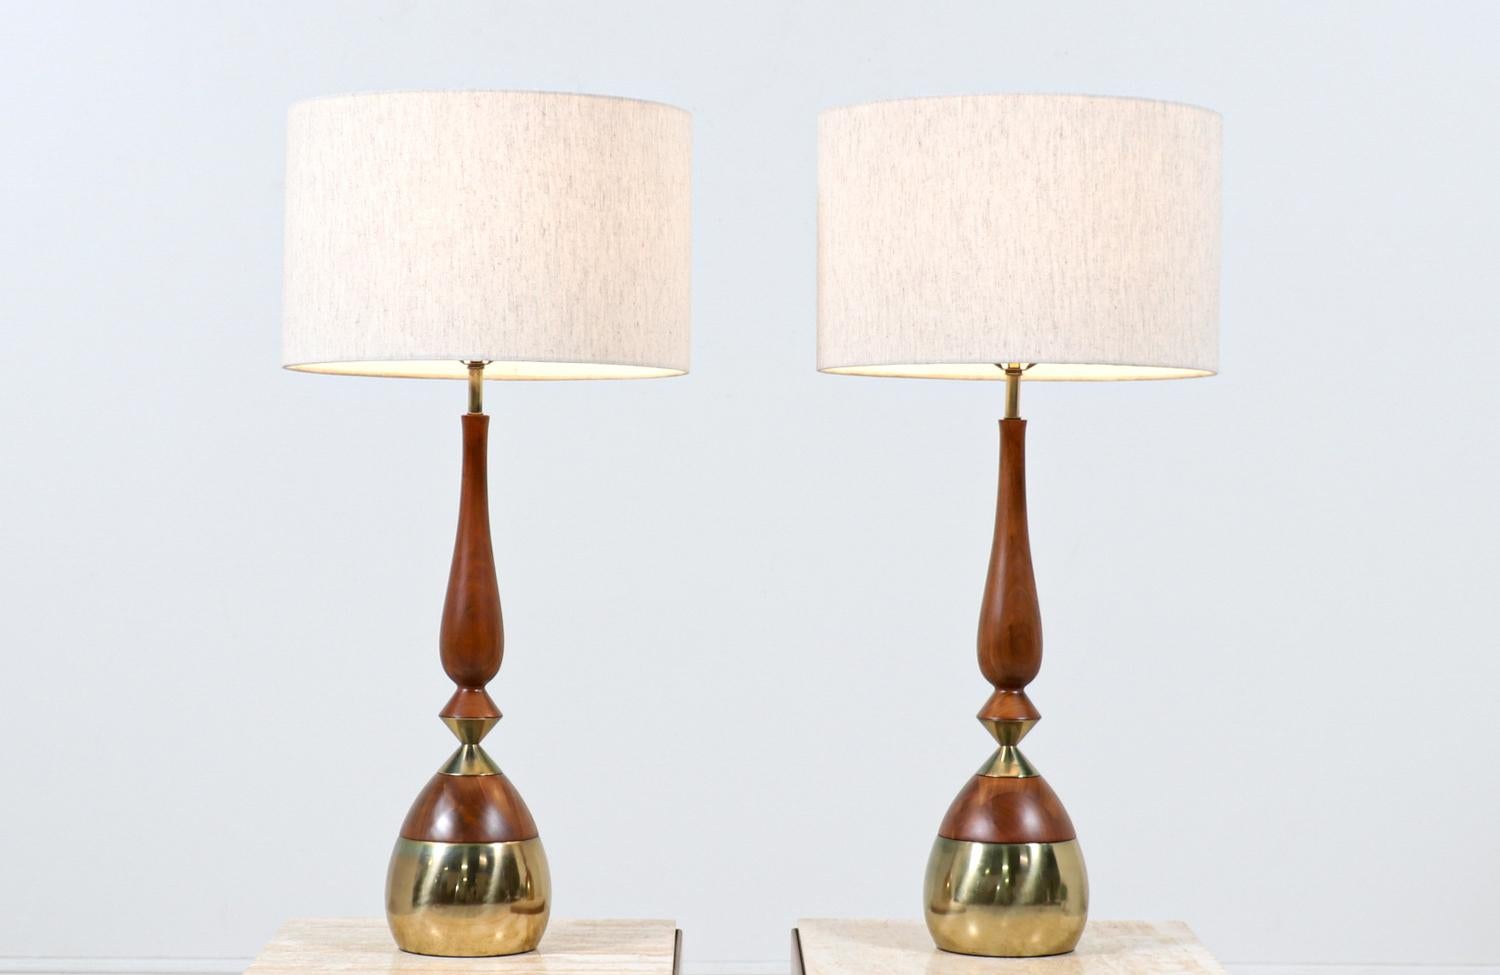 Pair of table lamps designed by Tony Paul for Westwood Industries in the United States circa 1950’s. These organic shaped lamps feature a walnut wood body with polished brass details on the base and middle creating a charming blend of colors and a